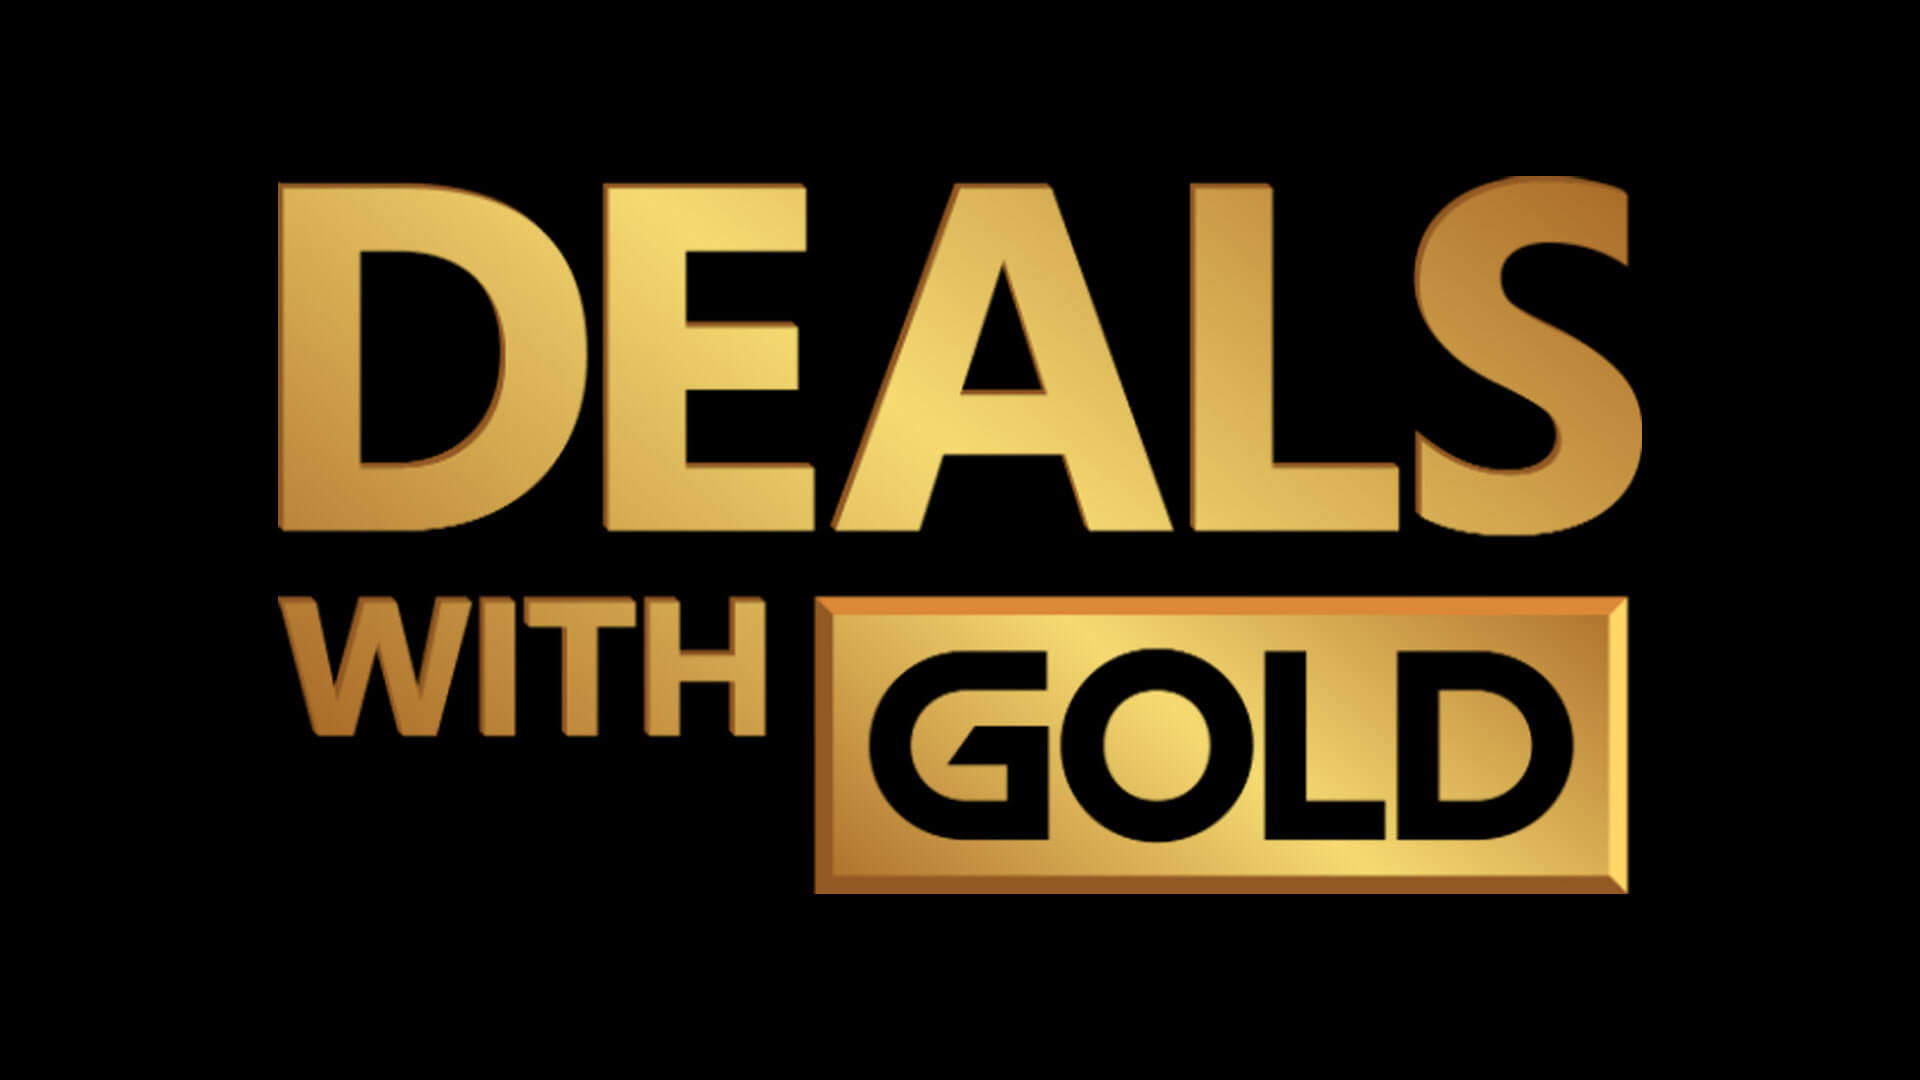 Deals with Gold semaine 08